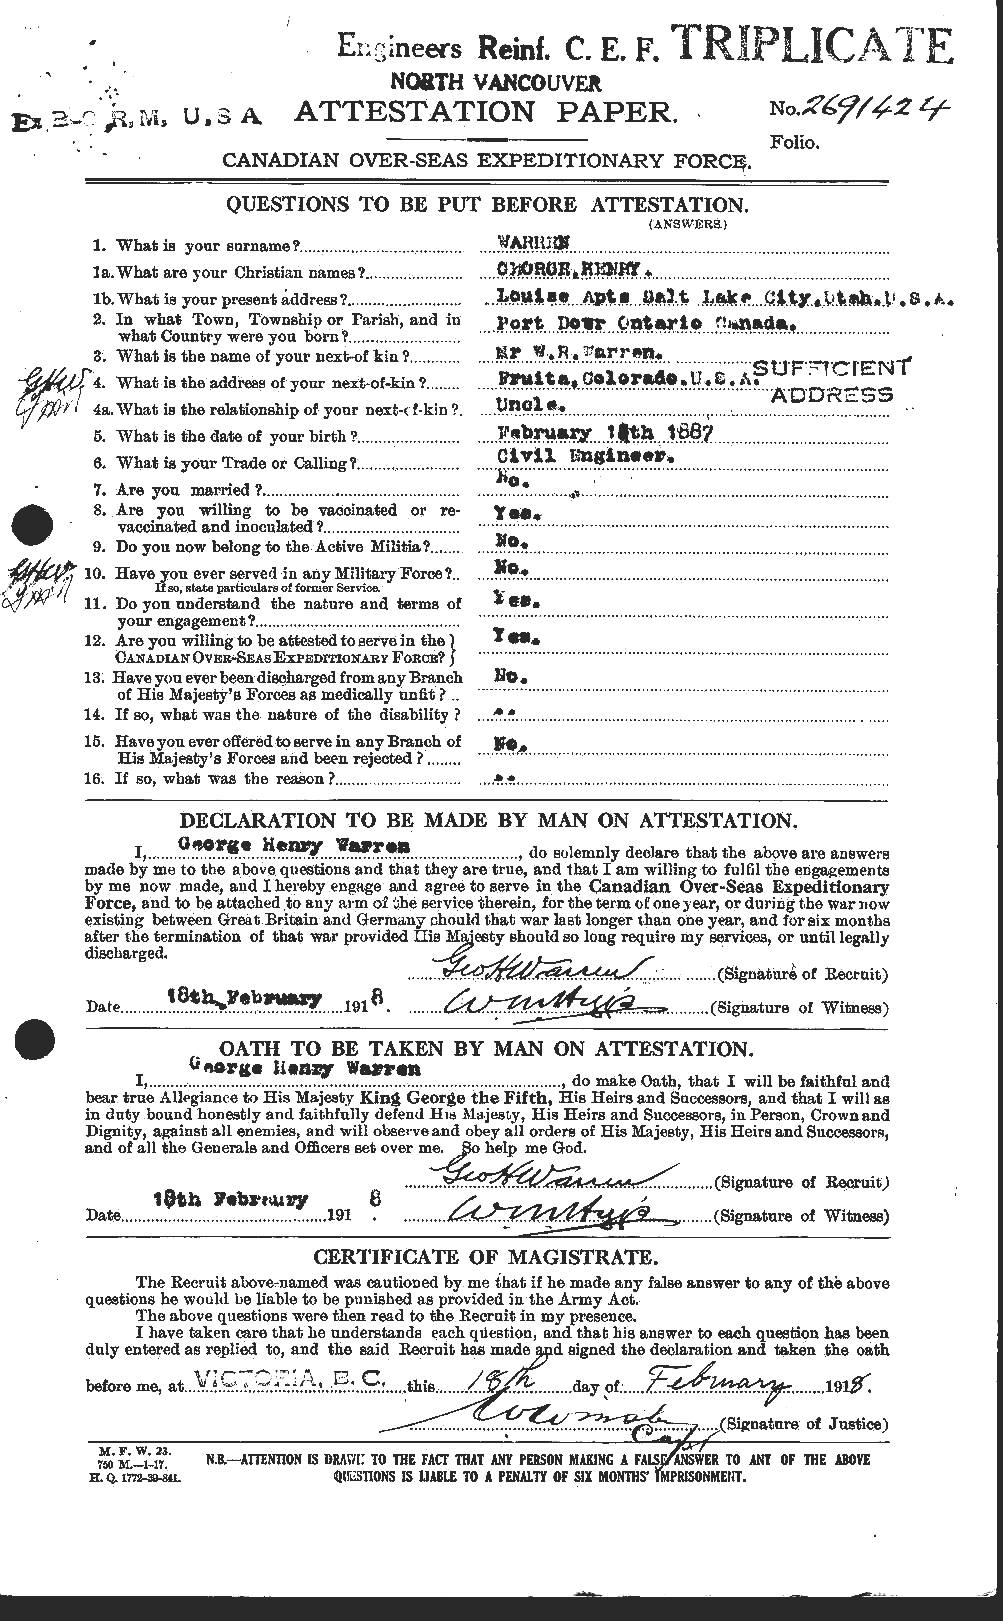 Personnel Records of the First World War - CEF 658465a